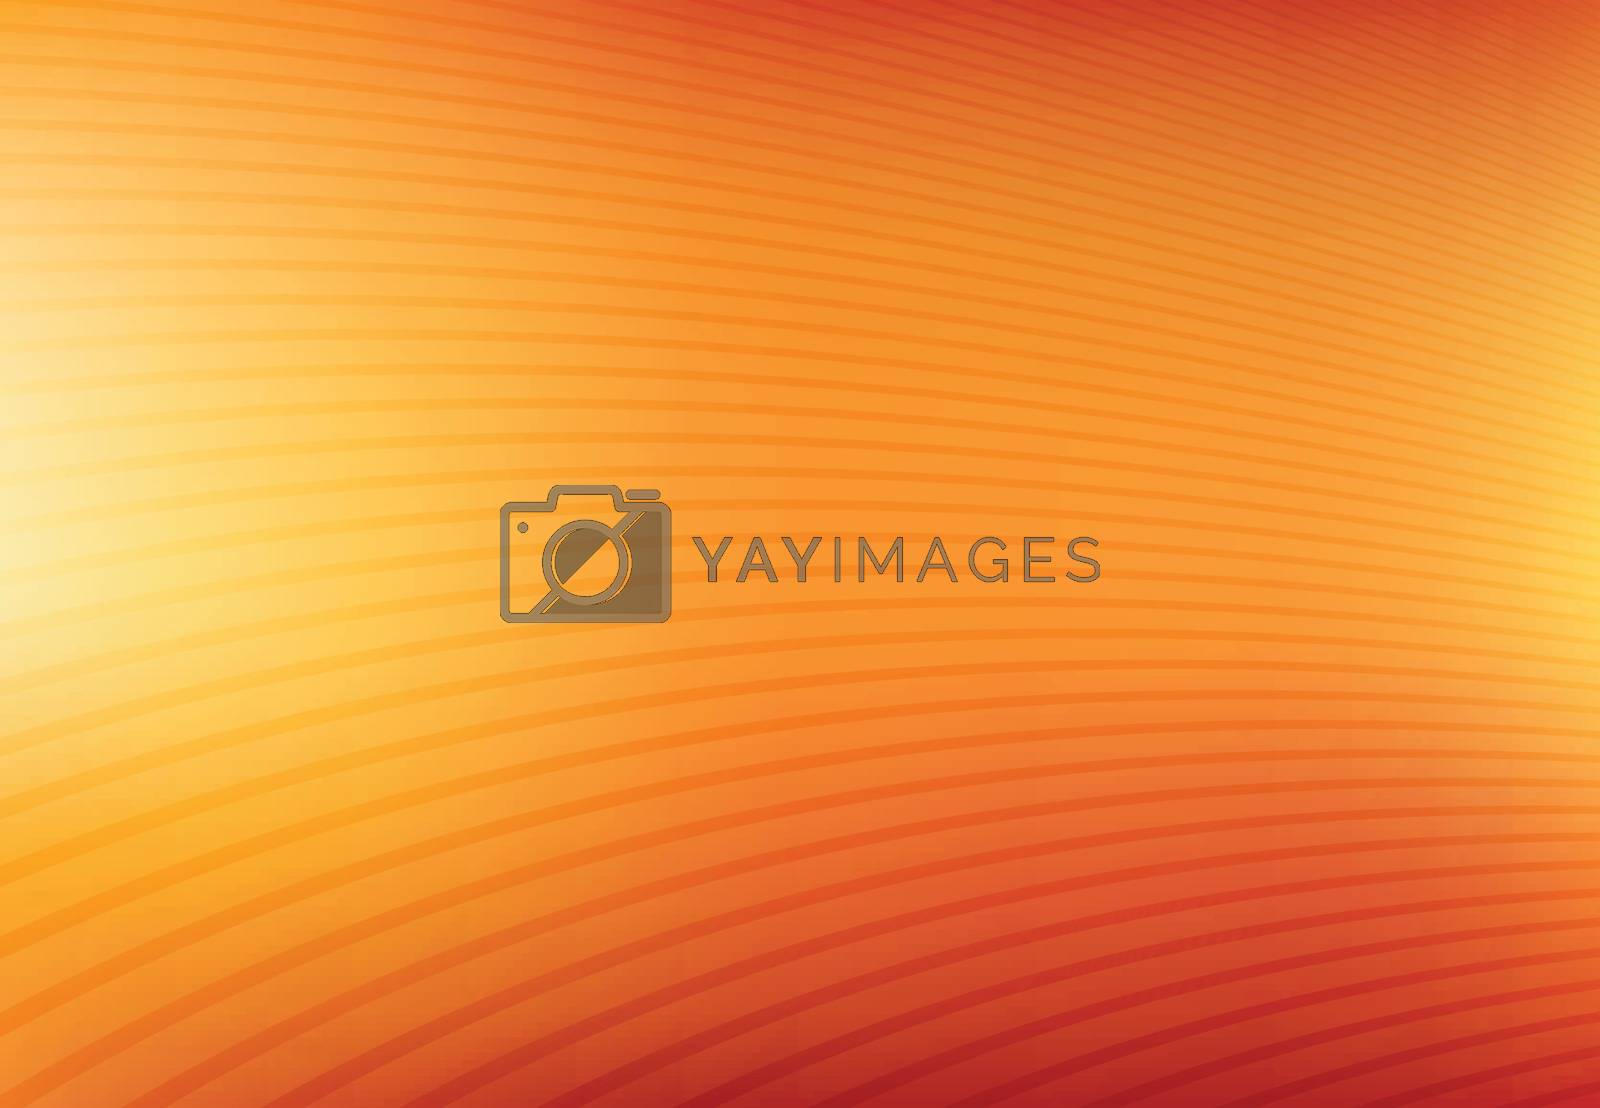 Royalty free image of Abstract orange and yellow mesh gradient with curve lines patter by phochi